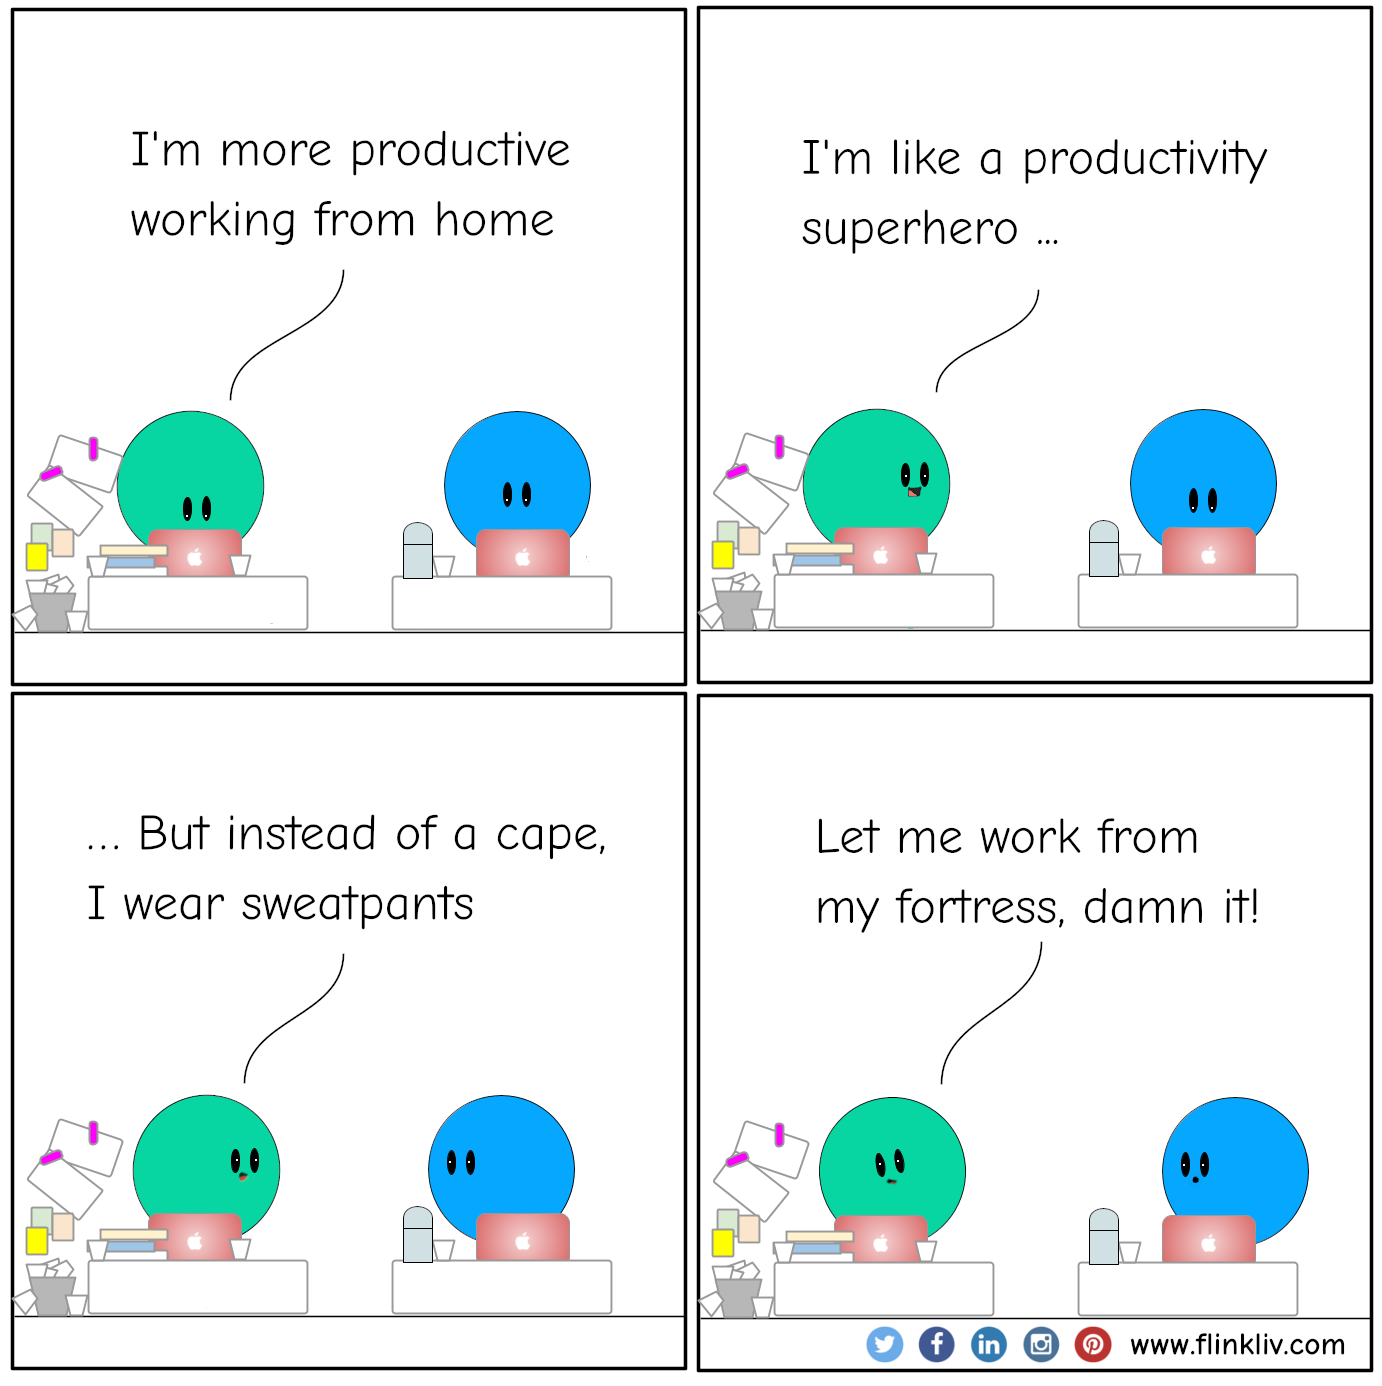 Conversation between A and B about work from home
				A: I'm more productive working from home.
				A: I'm like a productivity superhero. 
				A: But instead of a cape, I wear sweatpants
				A: Let me work from my fortress, damn it!
			